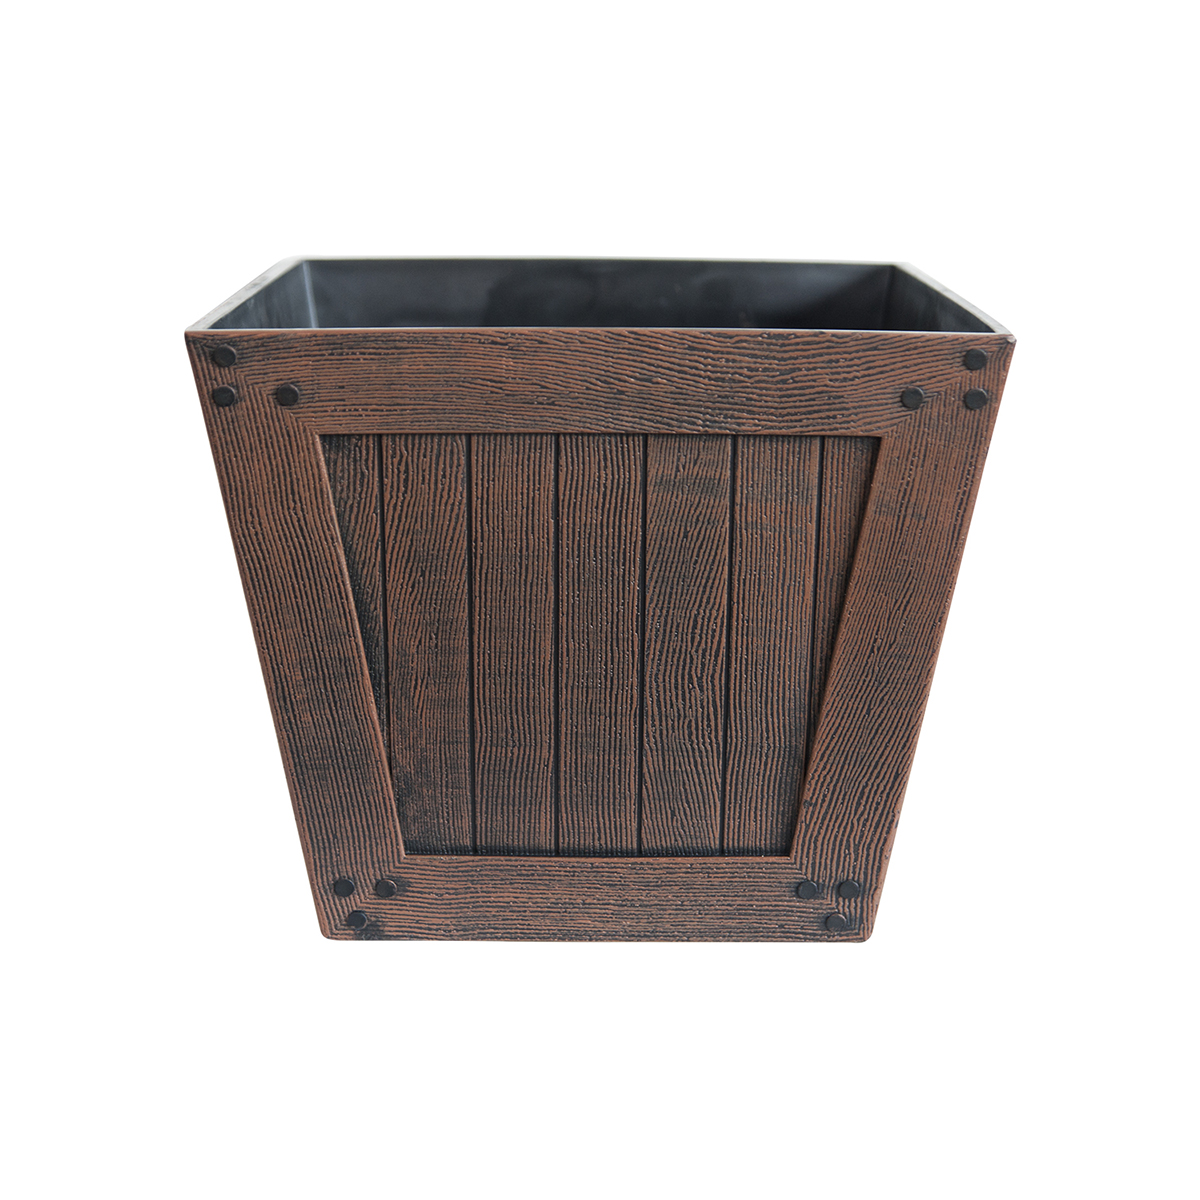 Large Plastic Square Wood Effect Outdoor Planter